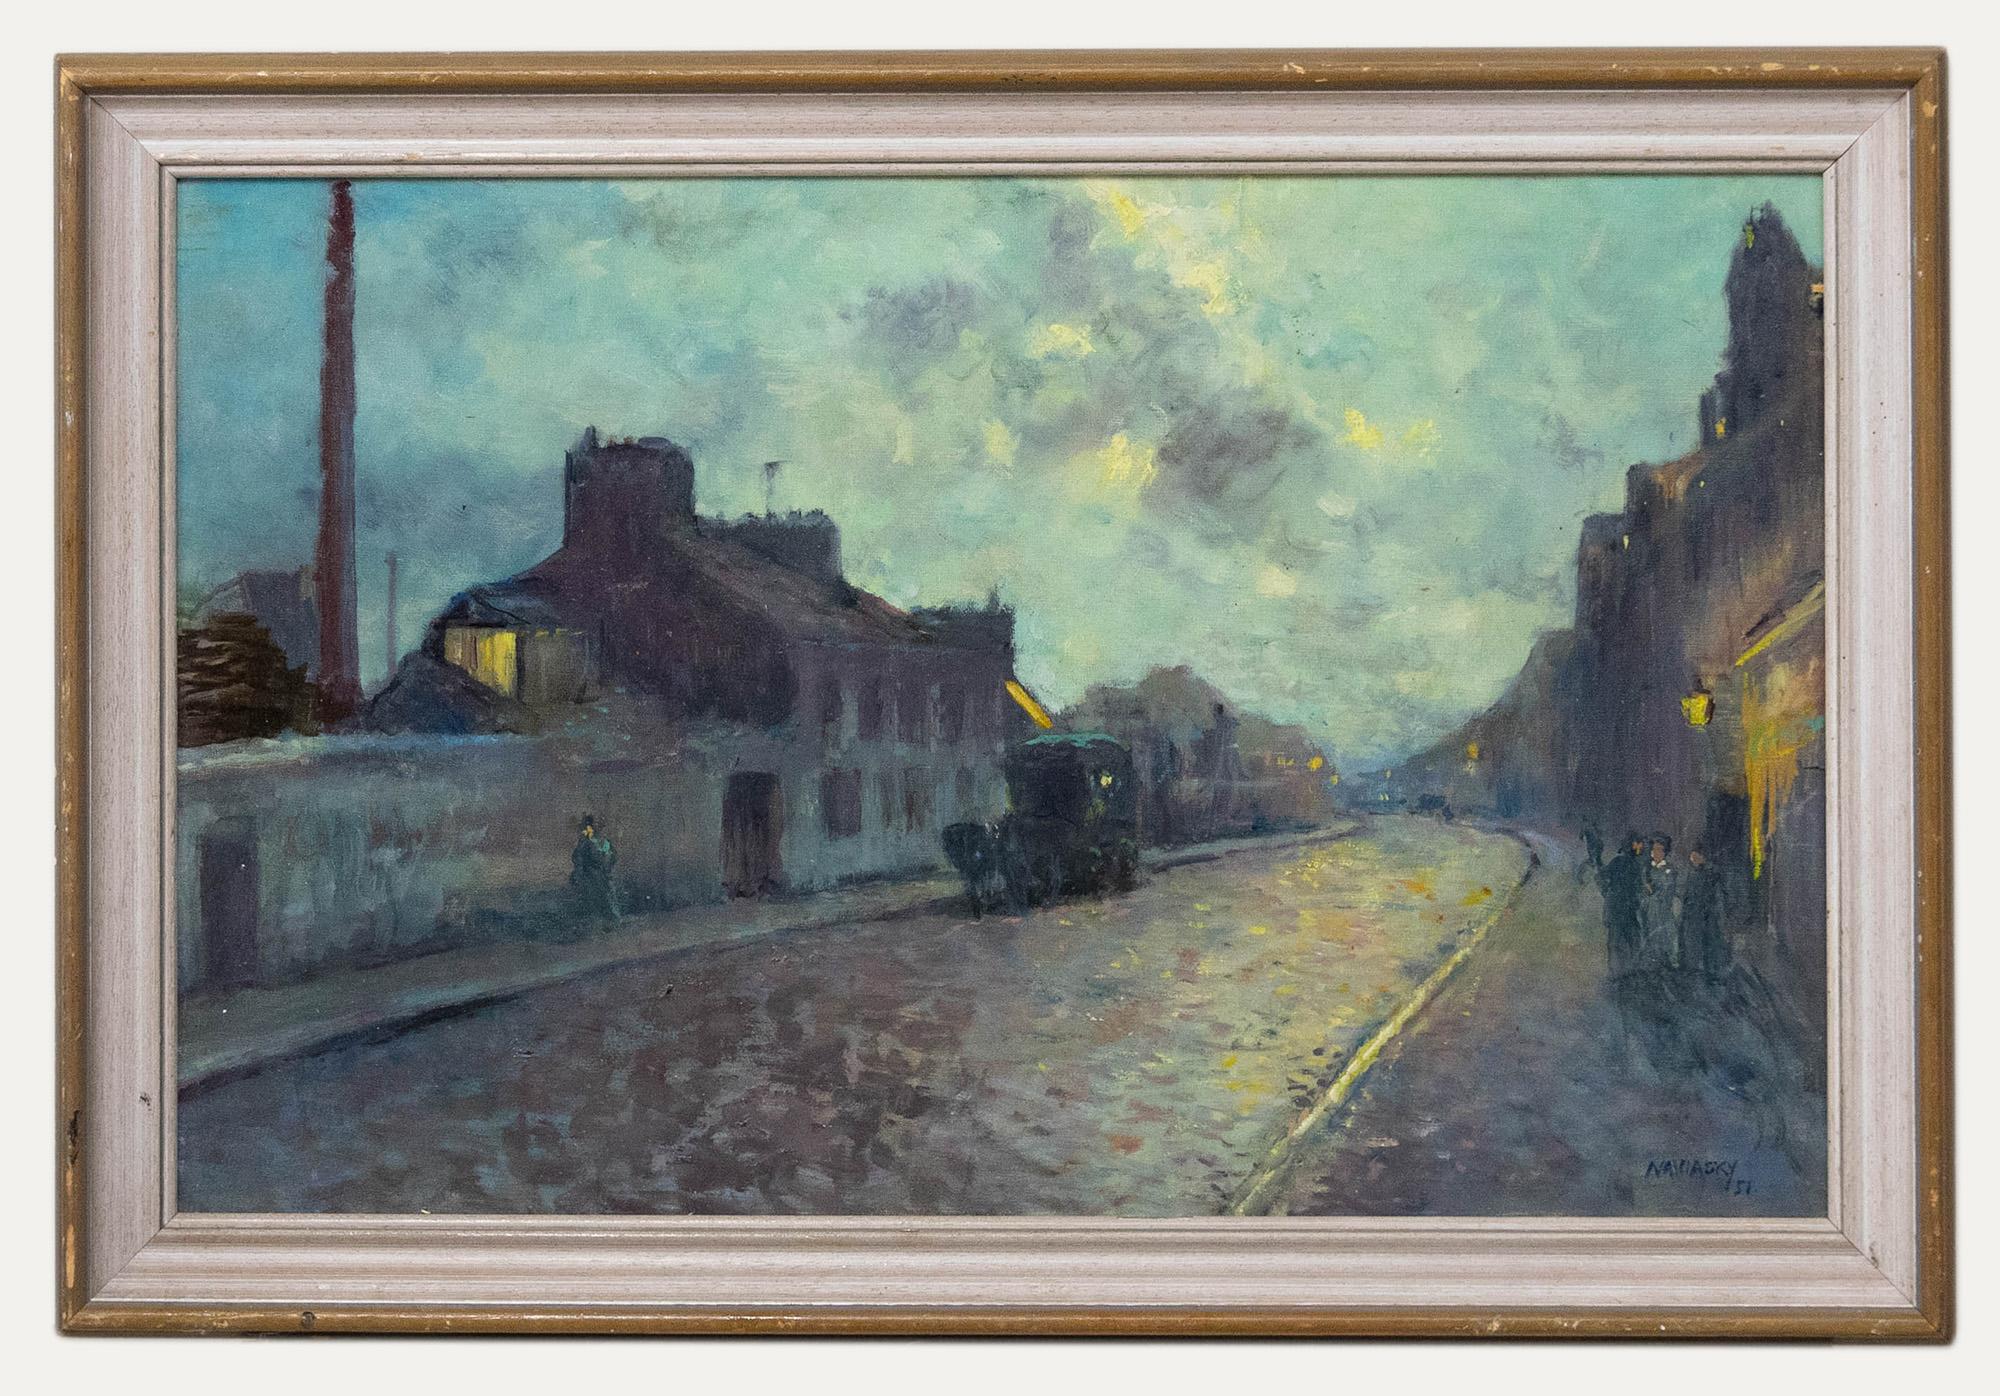 Unknown Landscape Painting - Manner of Philip Naviasky (1894-1983) - 20th Century Oil, Street Scene at Dusk